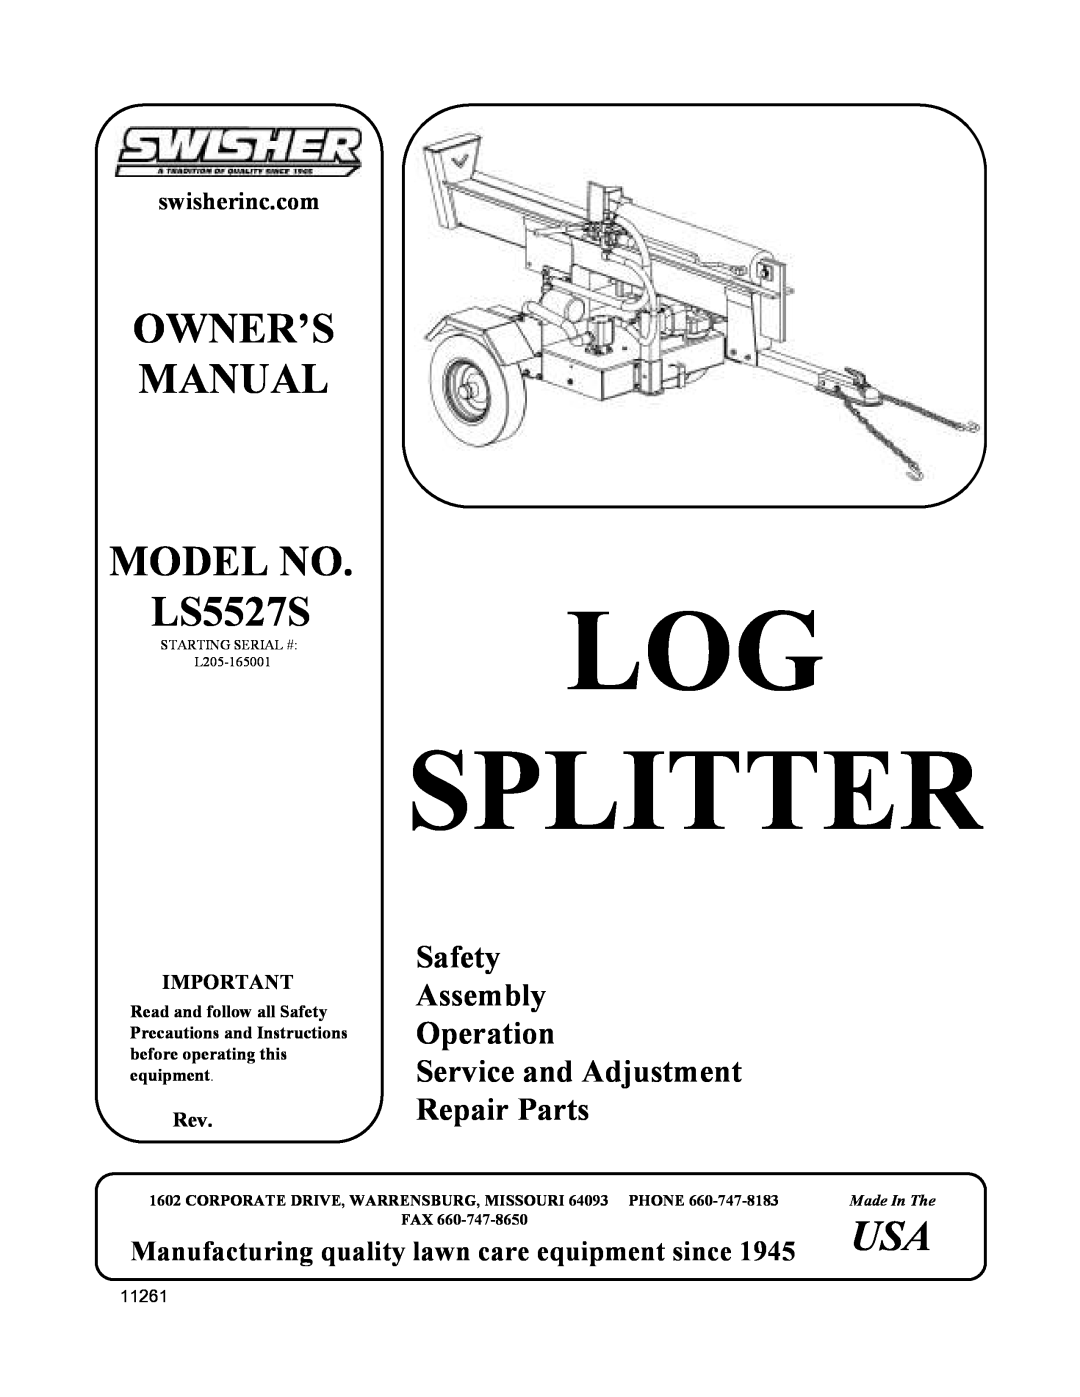 Swisher LS5527S owner manual Manufacturing quality lawn care equipment since, Log Splitter, Repair Parts, swisherinc.com 